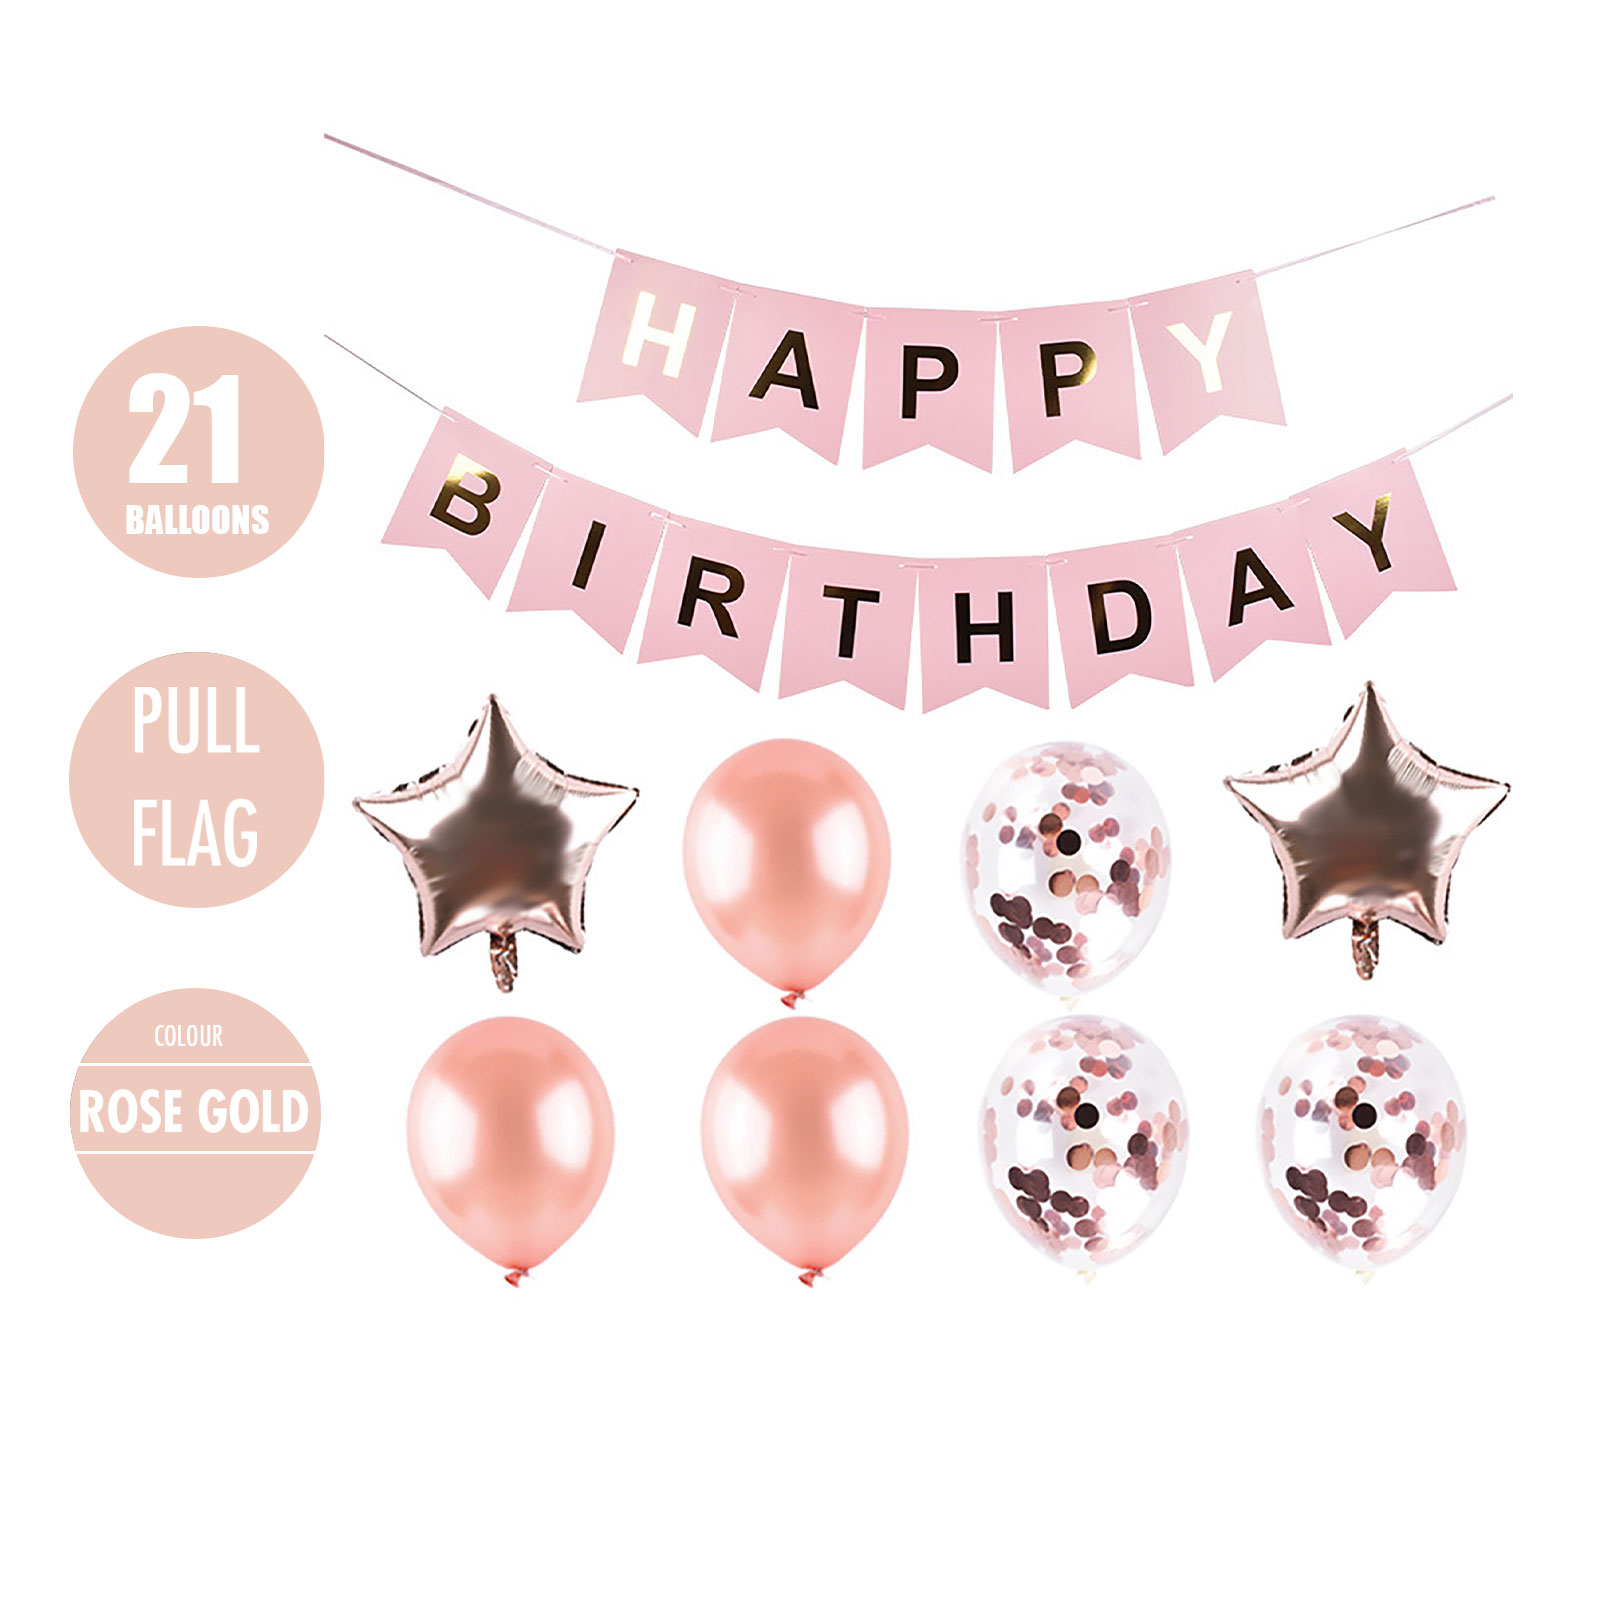 Celebrate in Style with the 21pcs Happy Birthday Balloon Set